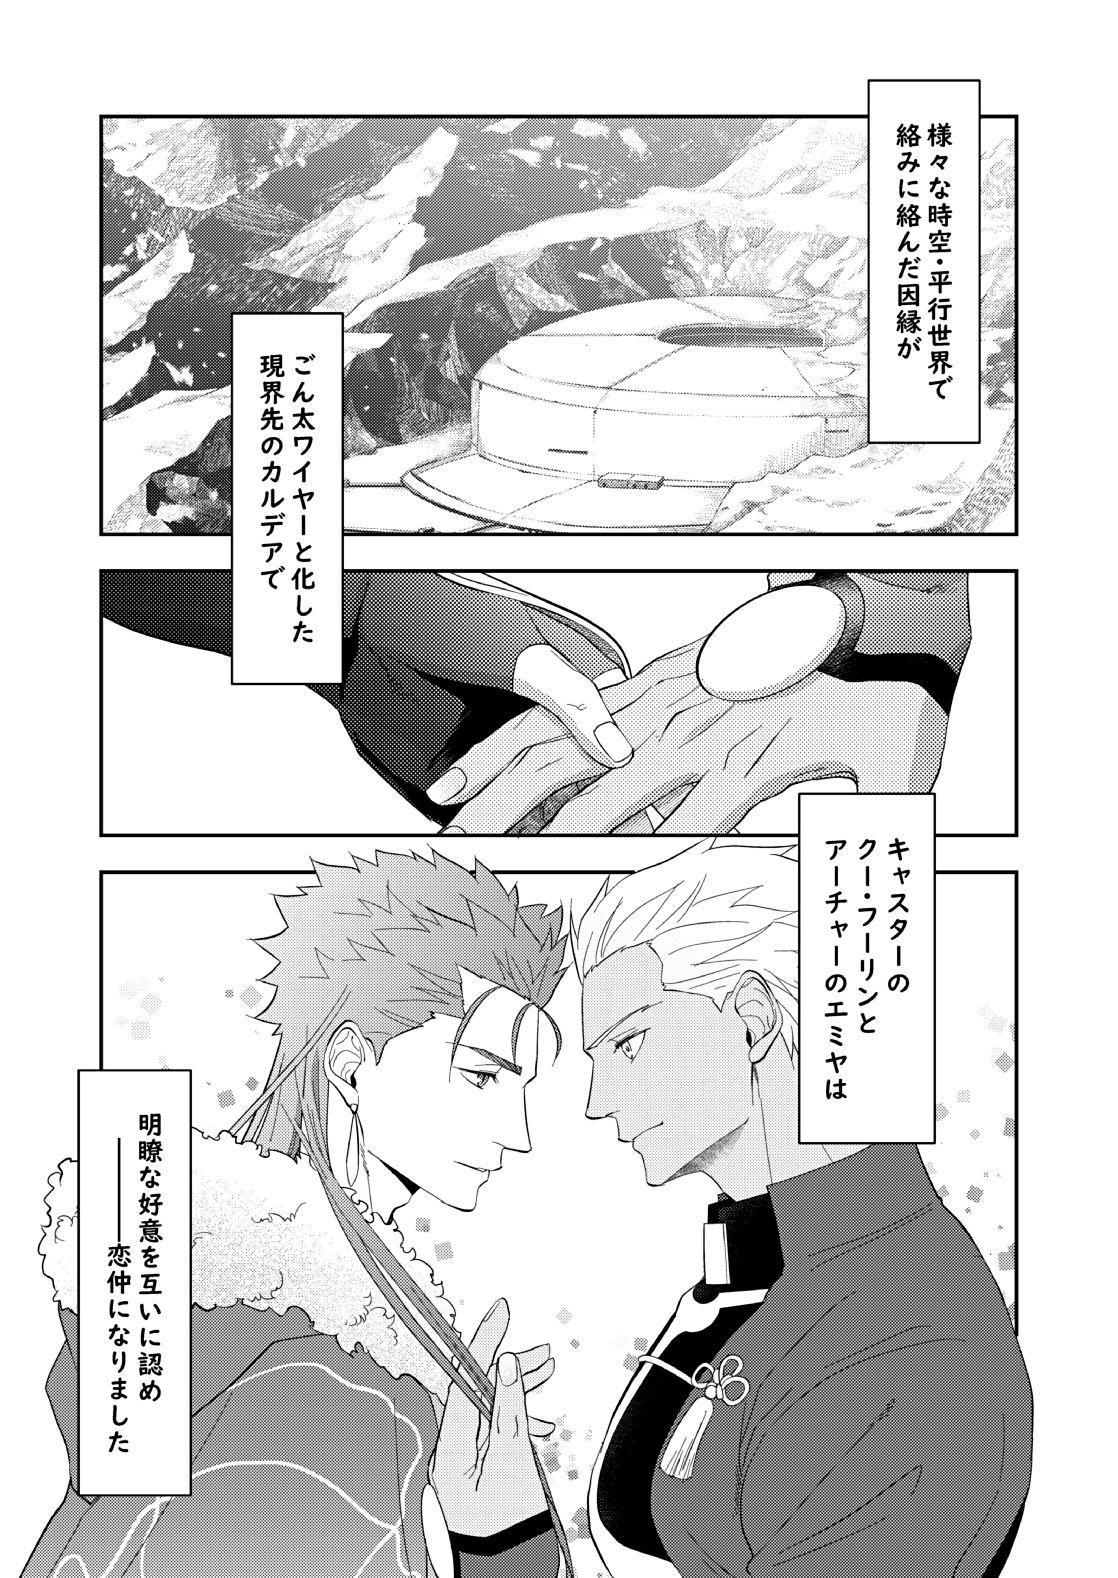 Puto deification - Fate grand order This - Page 3